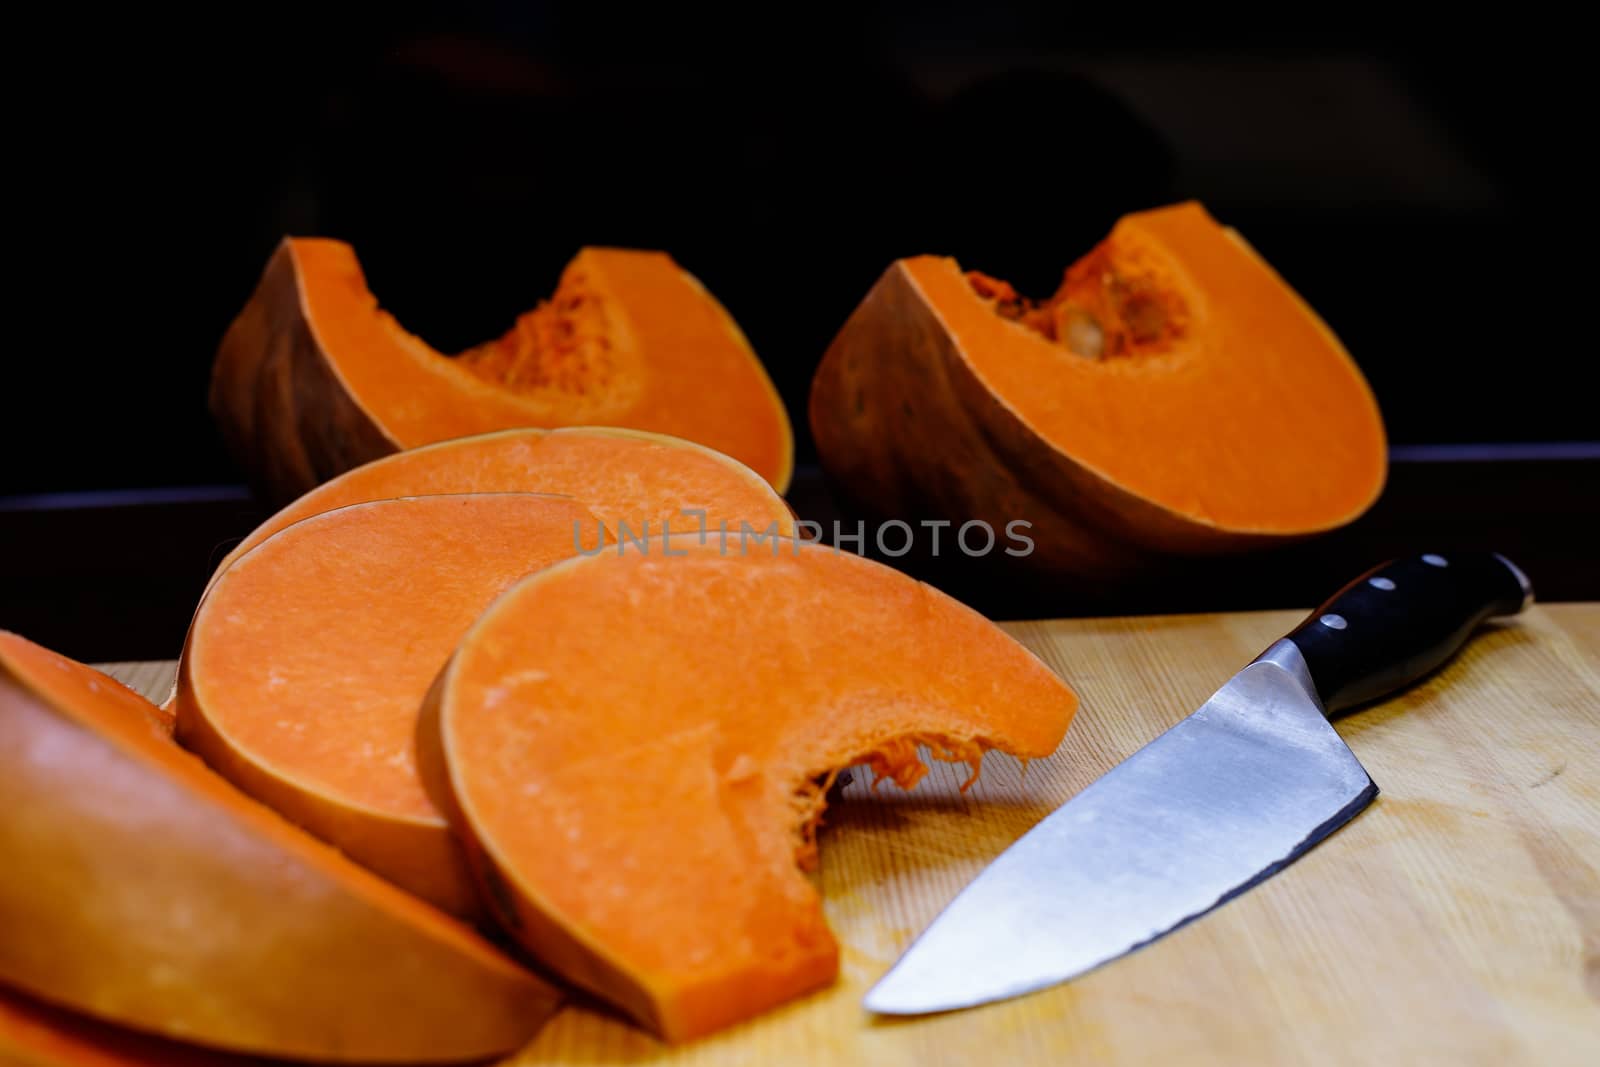 The food on thanksgiving. Pieces of bright orange pumpkin and a kitchen knife lie on a wooden Board. by bonilook